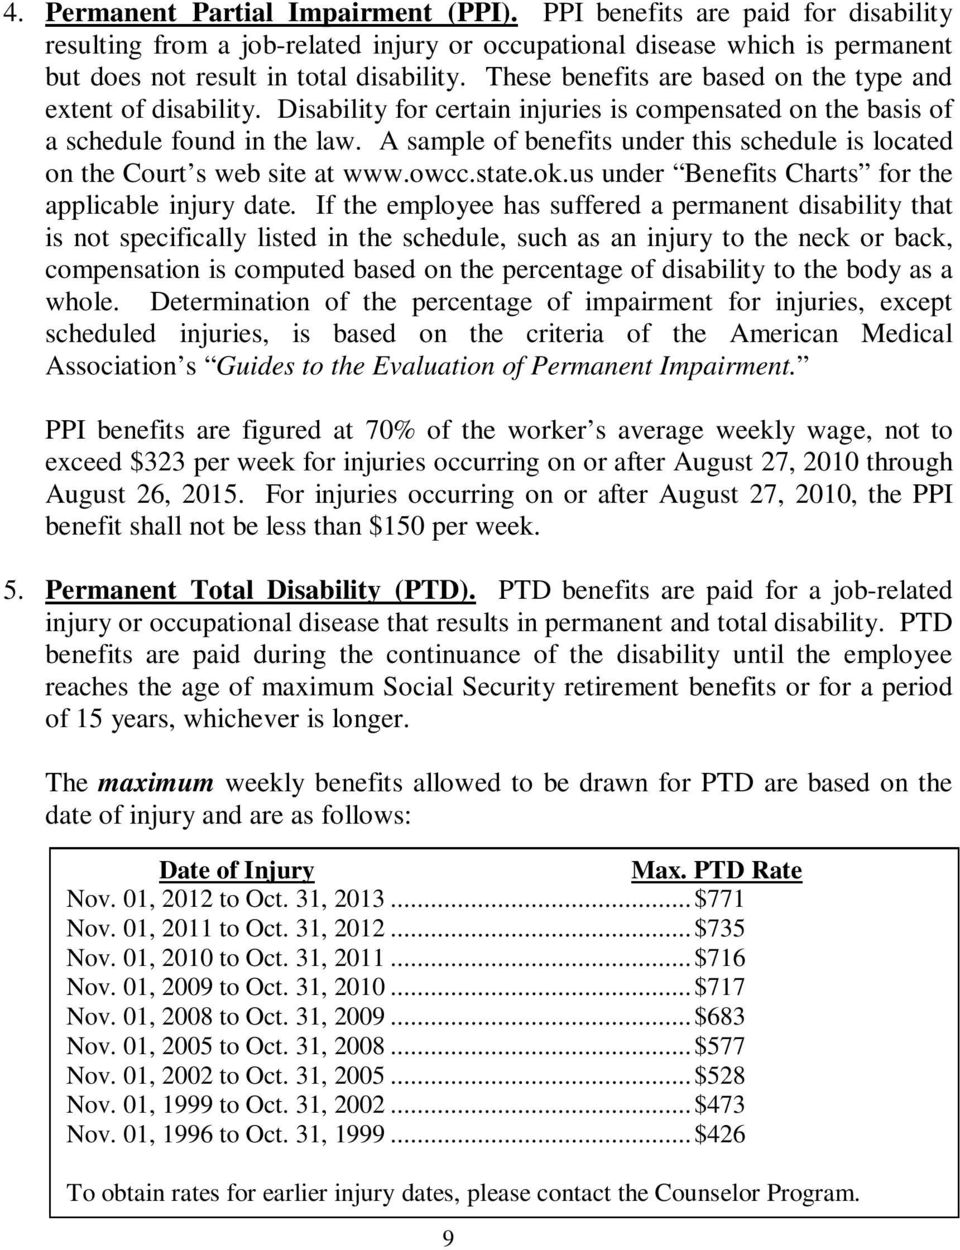 A sample of benefits under this schedule is located on the Court s web site at www.owcc.state.ok.us under Benefits Charts for the applicable injury date.